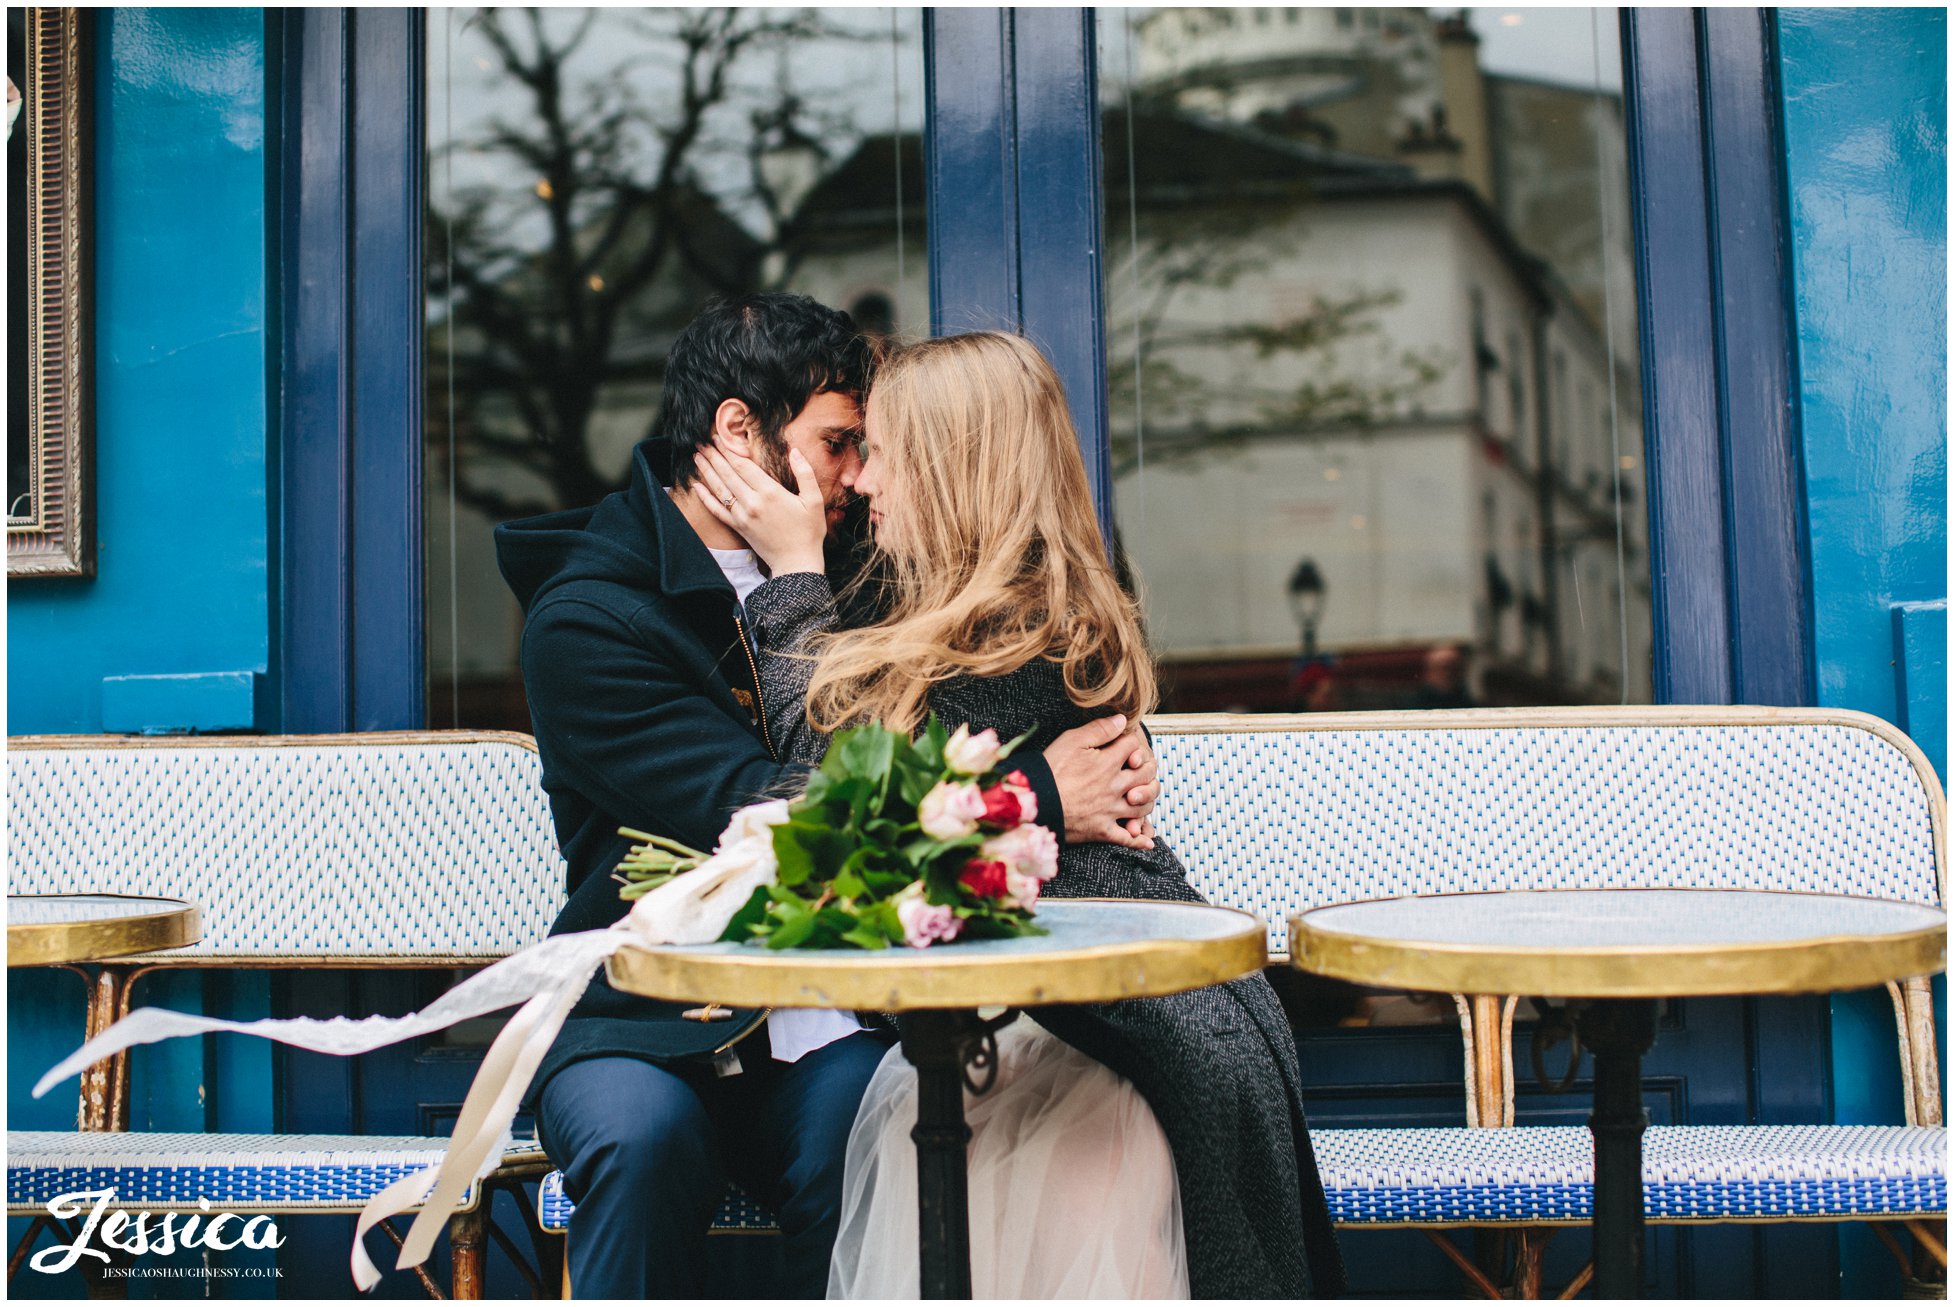 wind blows brides hair as she kisses her groom sitting in a cafe in mont marte